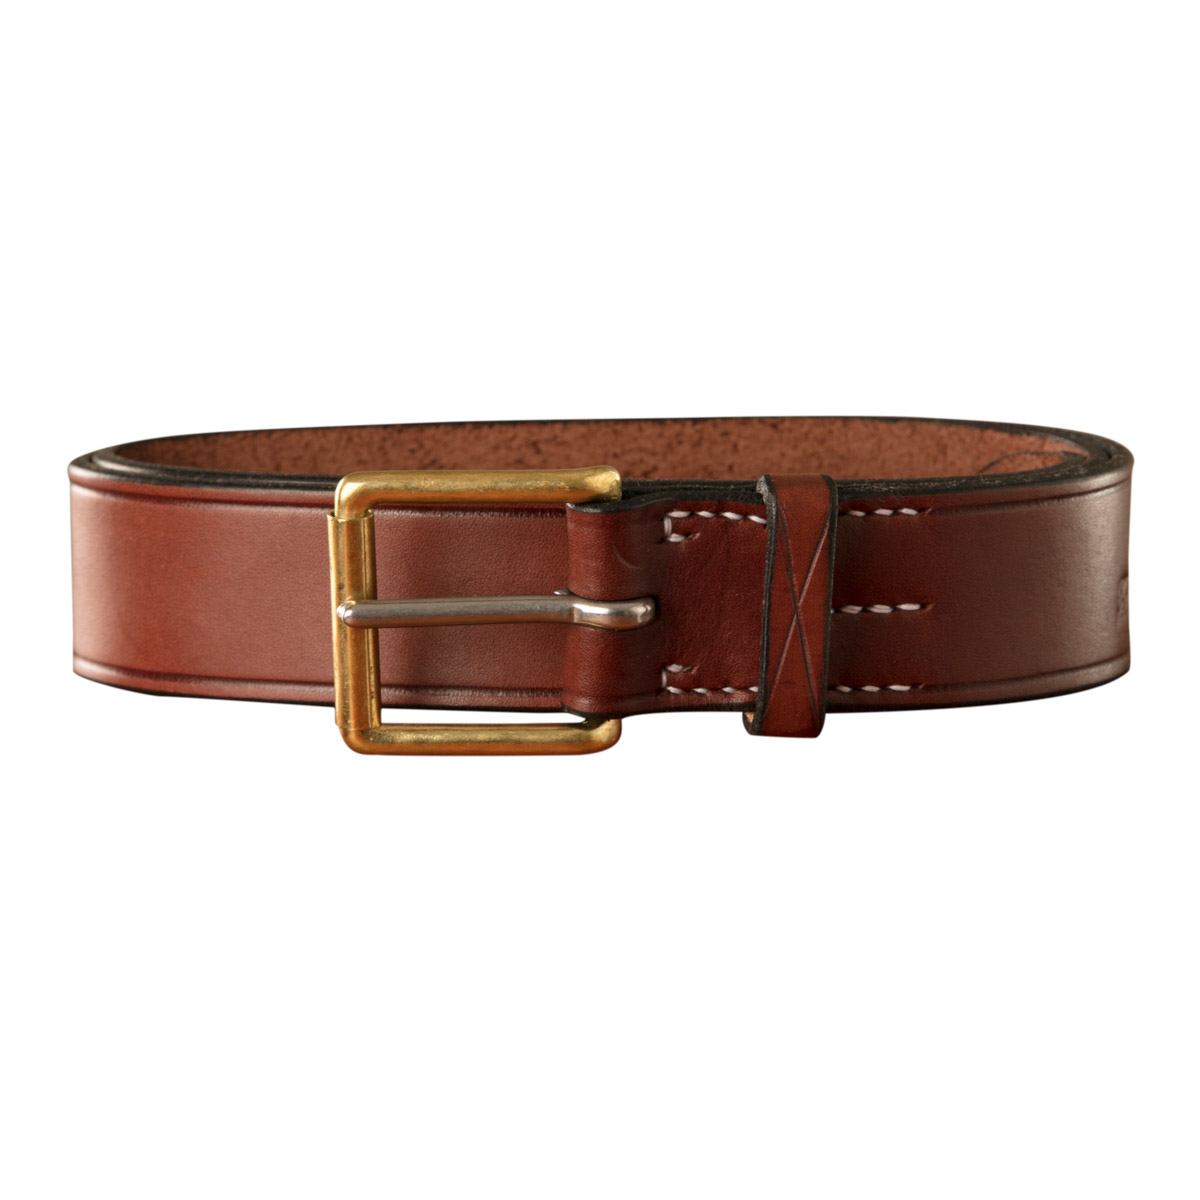 Stockmans Belt, Solid Leather, with Brass Roller Buckle - Plain 1